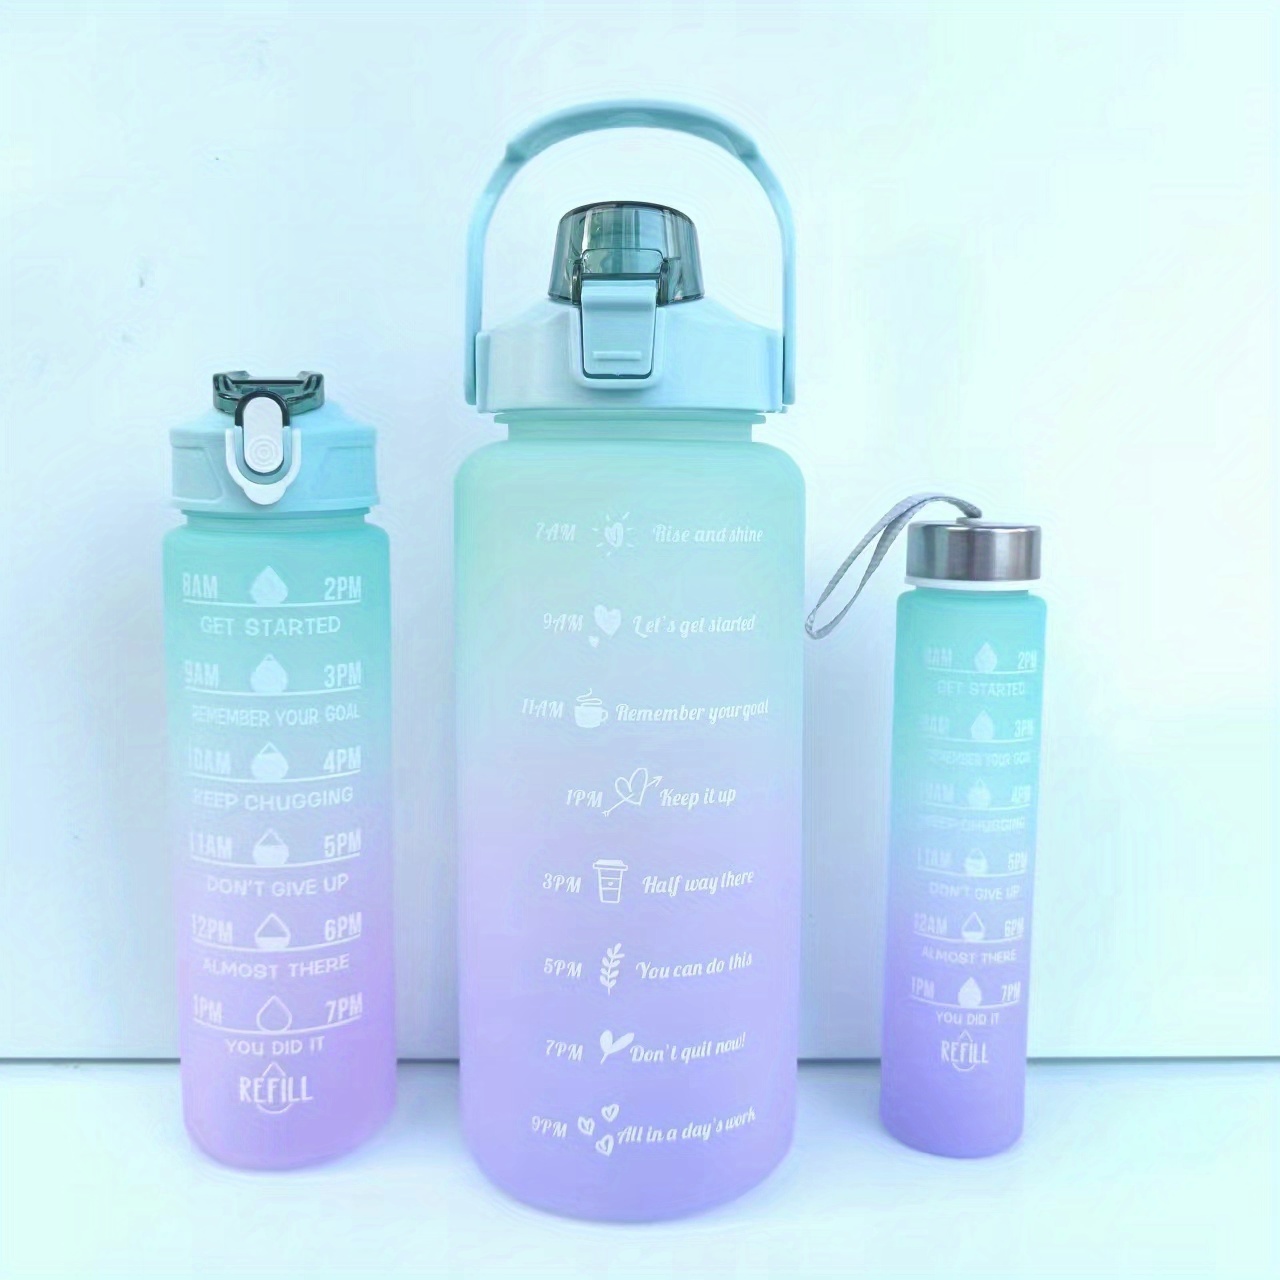 Shapex - Time Marked Cute Water Bottles for Women and Men with Times to Drink, BPA Free Frosted & Aesthetic Water Bottle with Time Marker, Clear